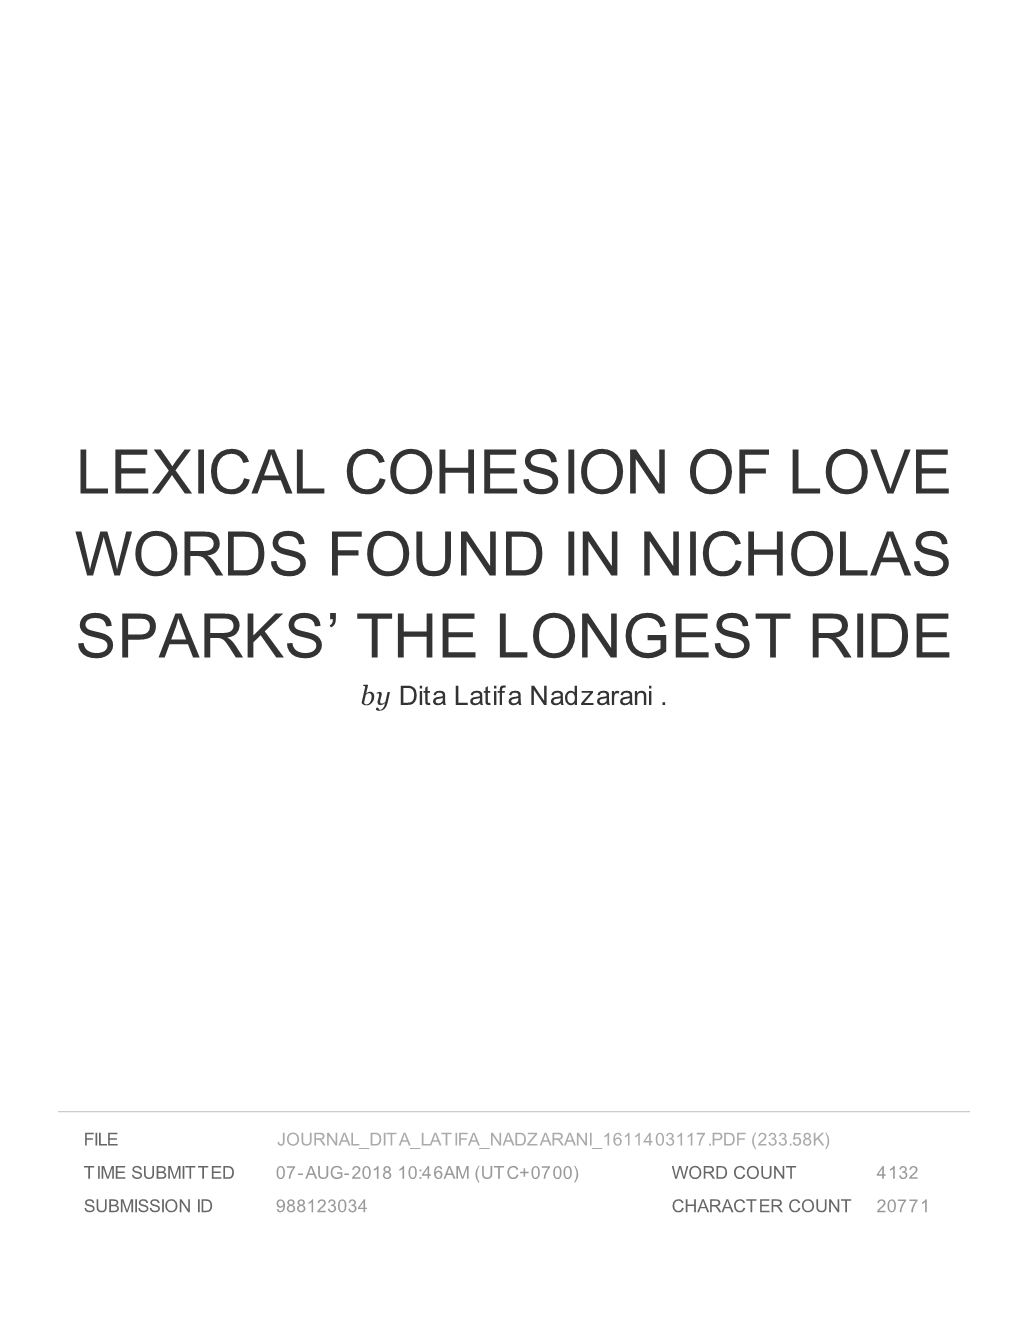 Lexical Cohesion of Love Words Found in Nicholas Sparks' the Longest Ride